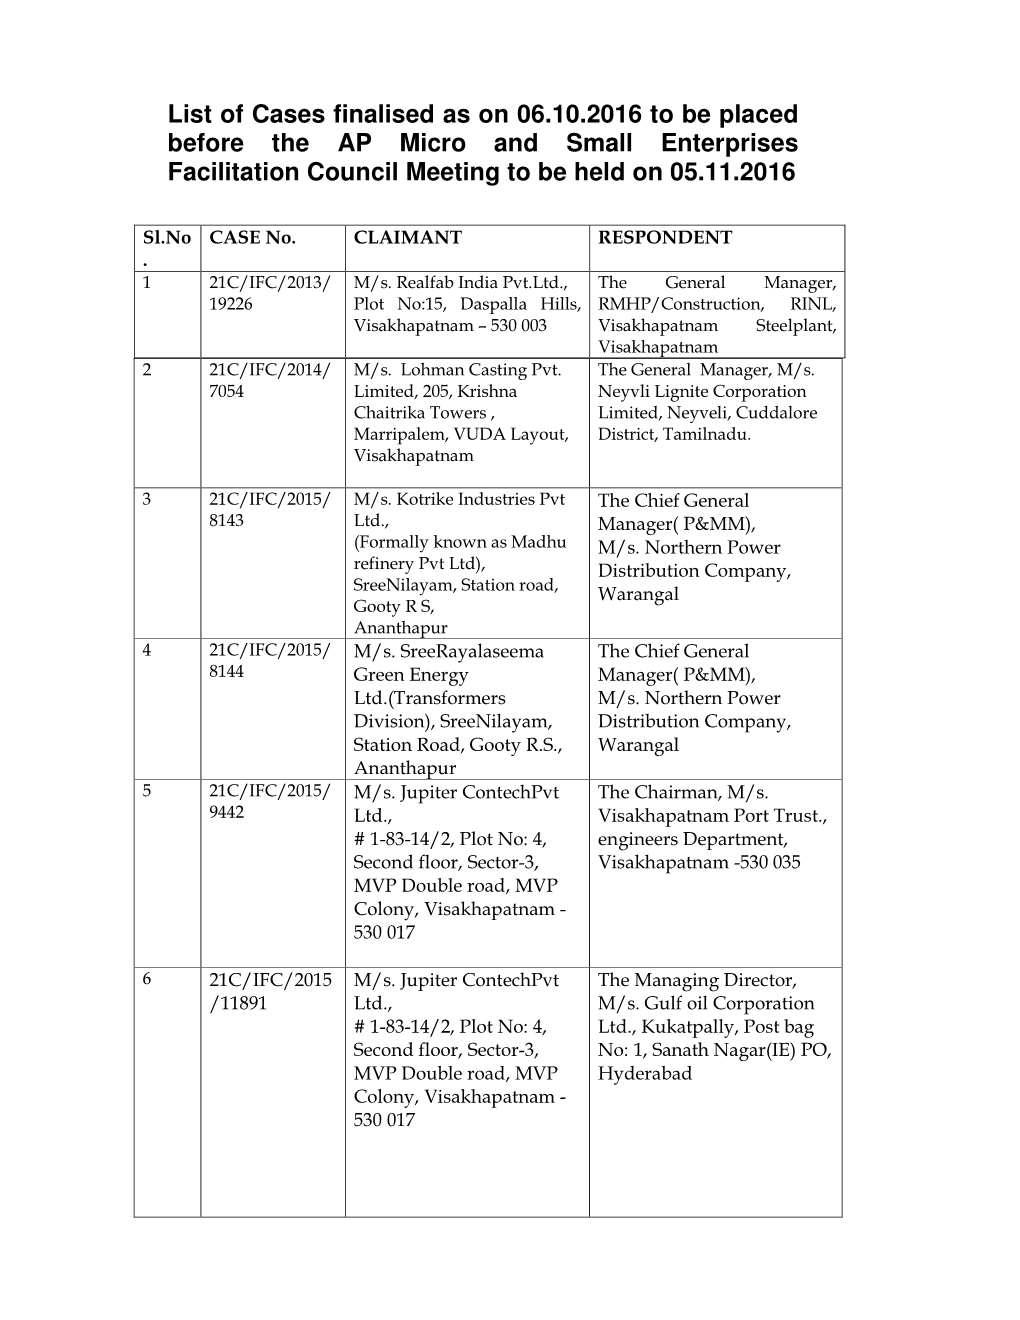 IFC Cases Finalised As on 06.10.2016 for the Meeting to Be Held on 05.11.2016